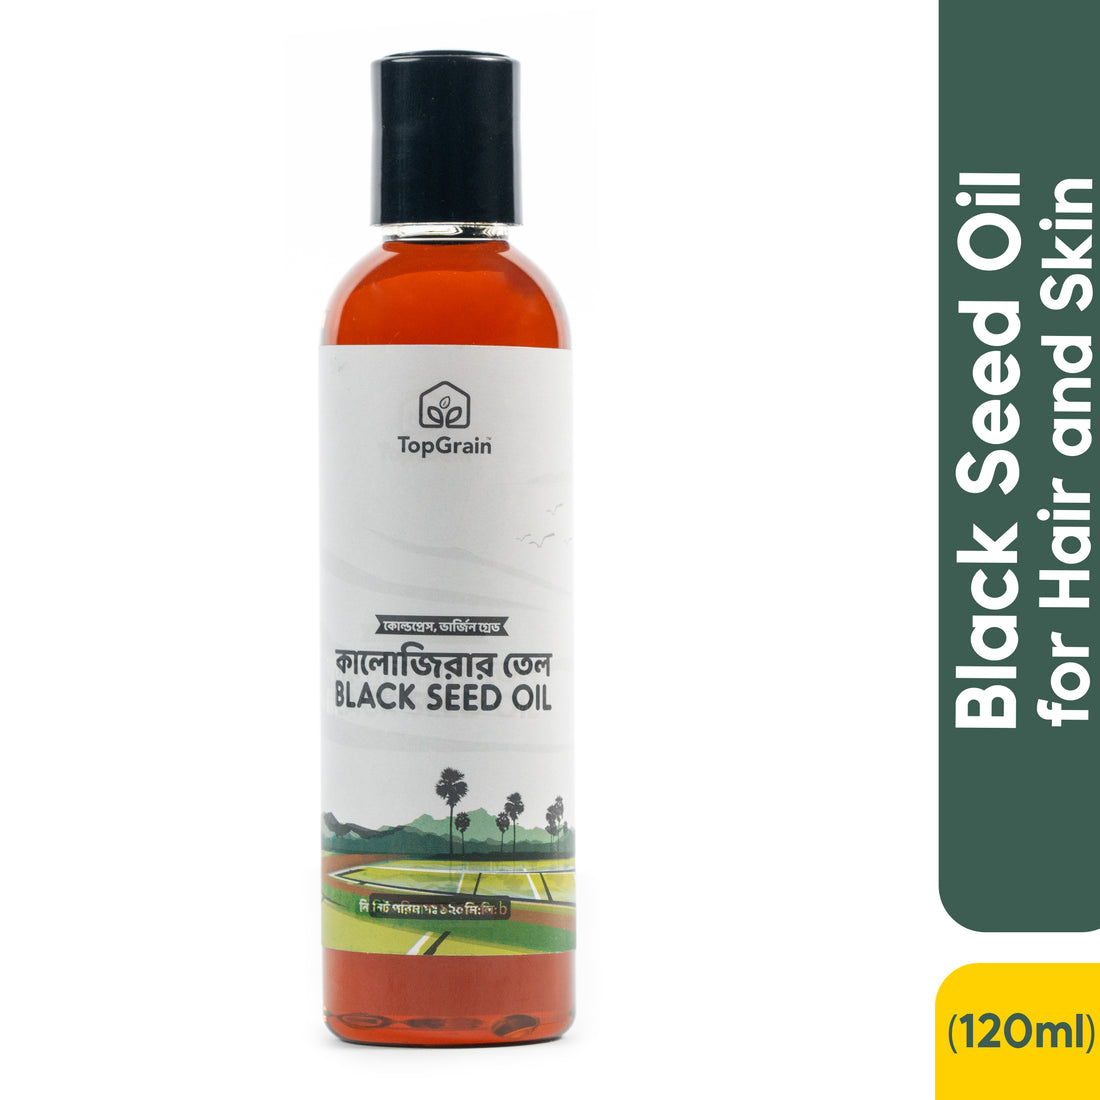 TopGrain Black Seed Oil for Skin and Hair (120ml)